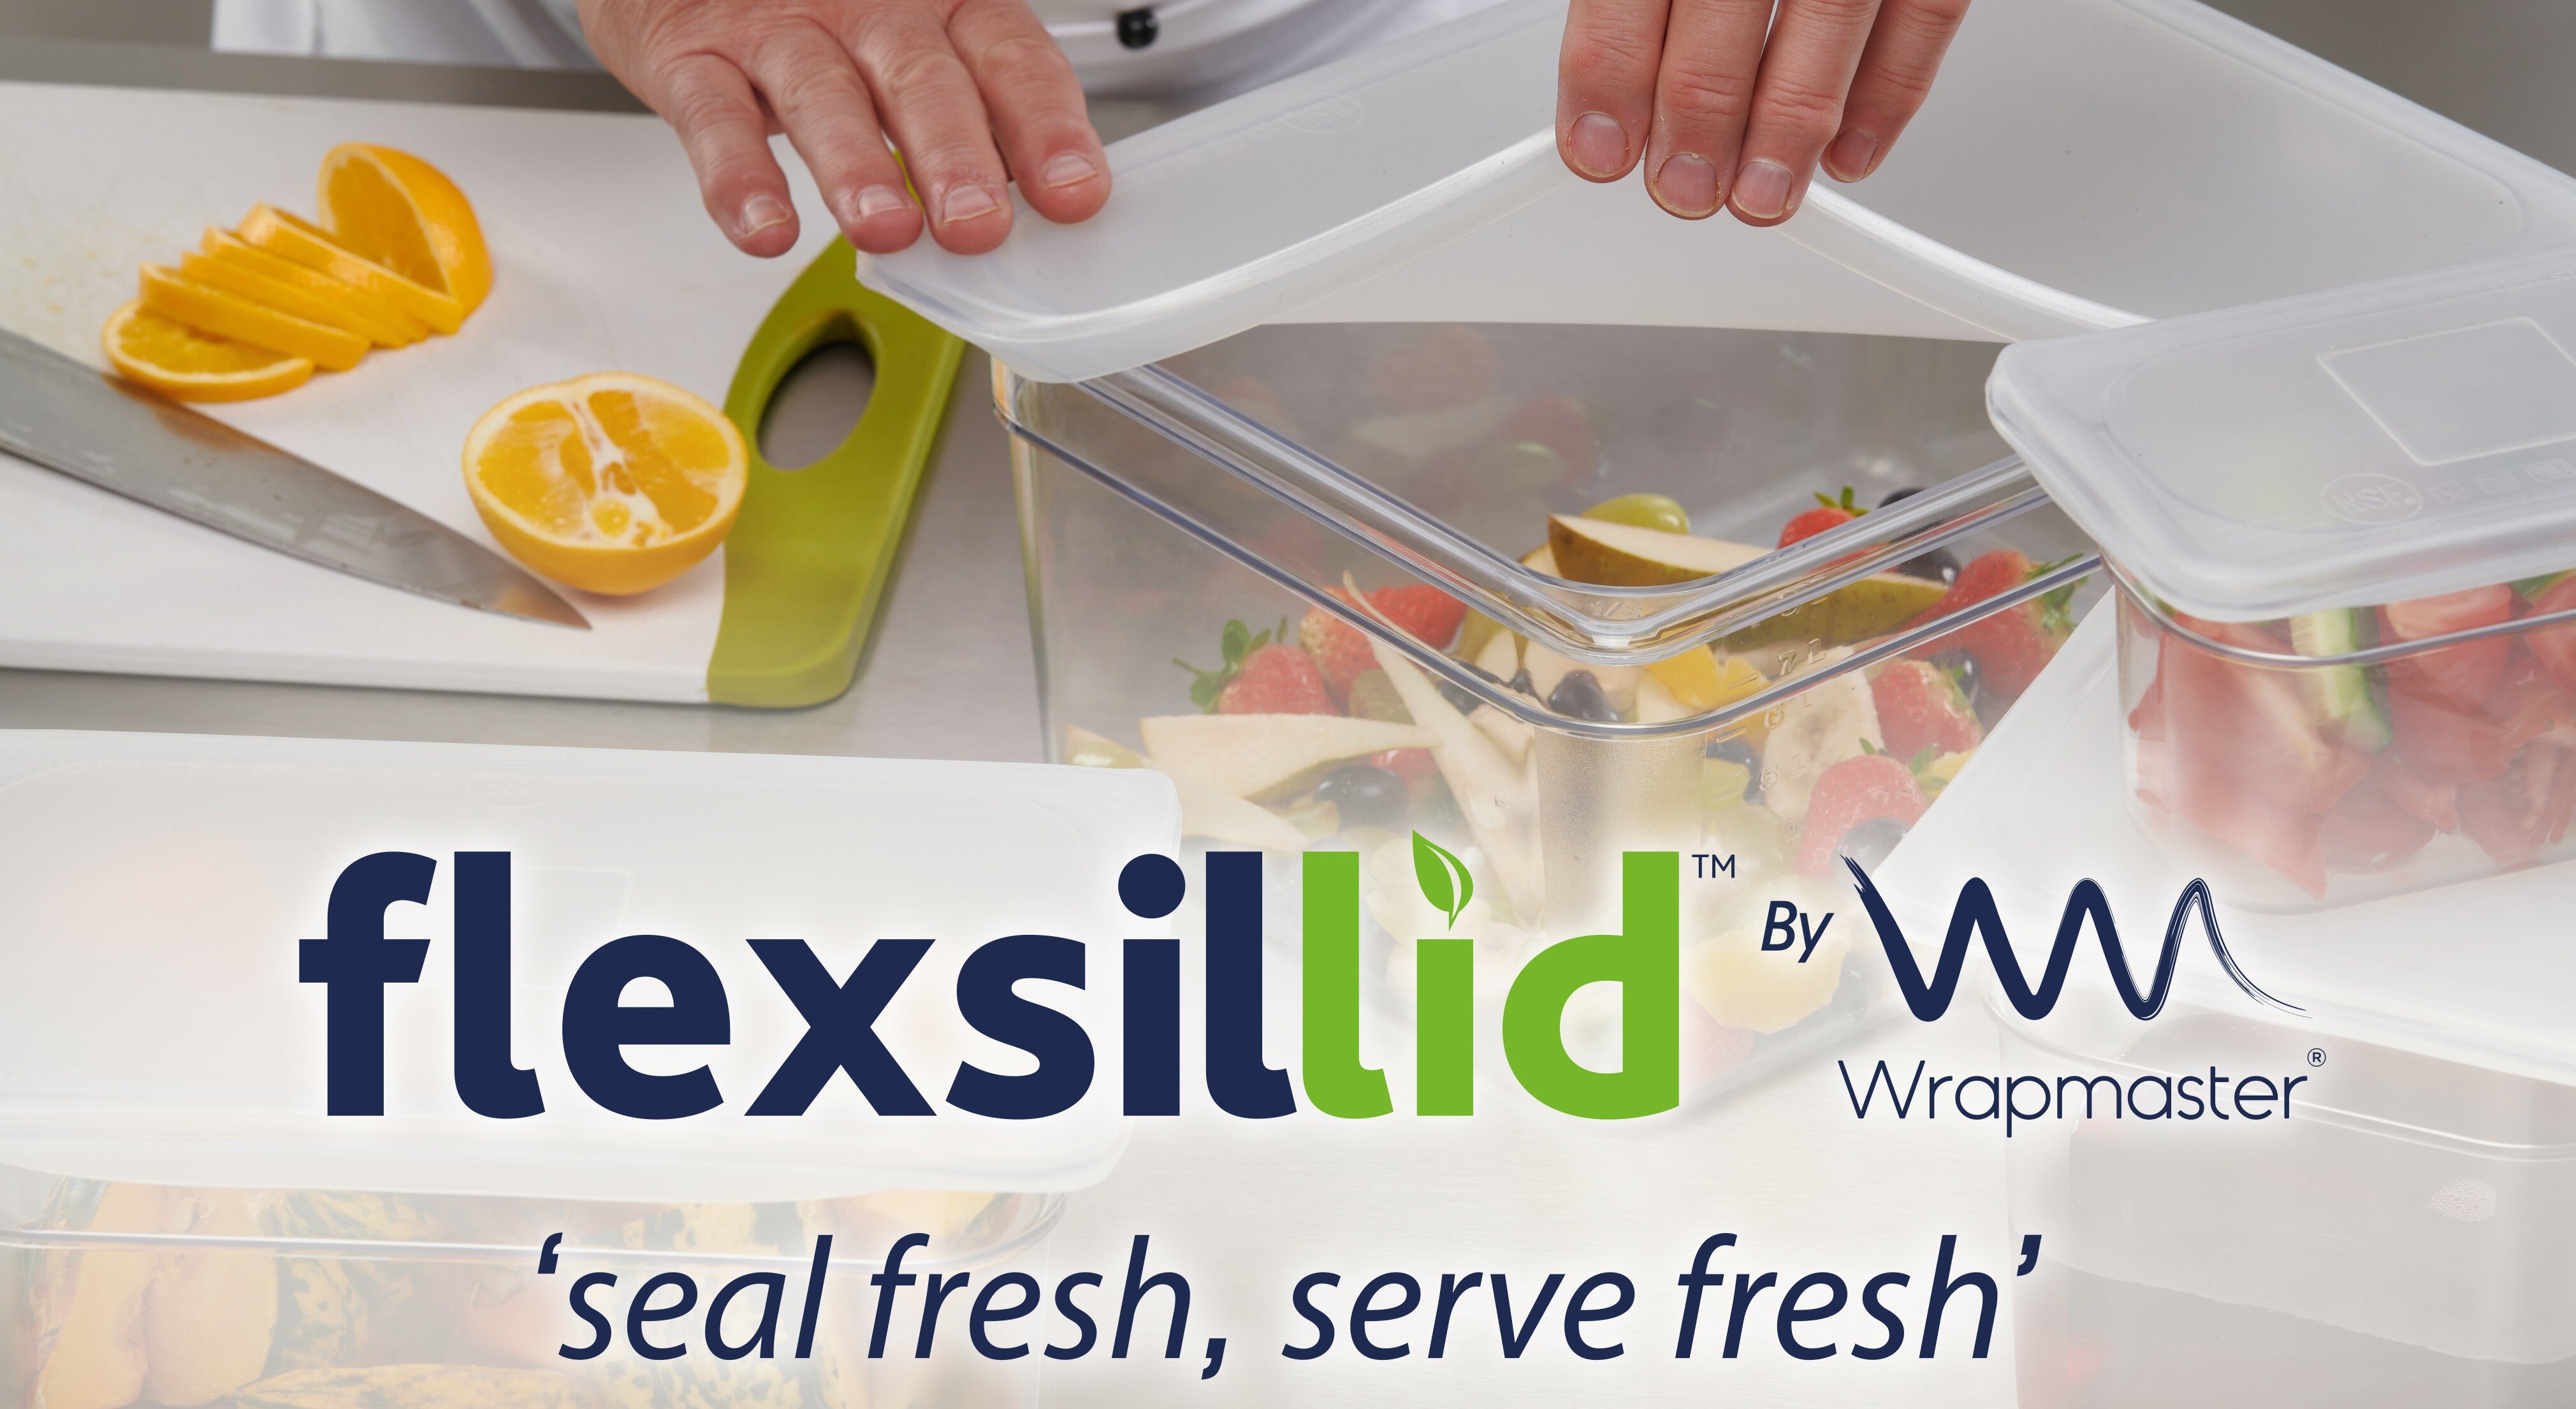 Give your fresh food storage some flex with the award-winning Flexsil-Lid by Wrapmaster